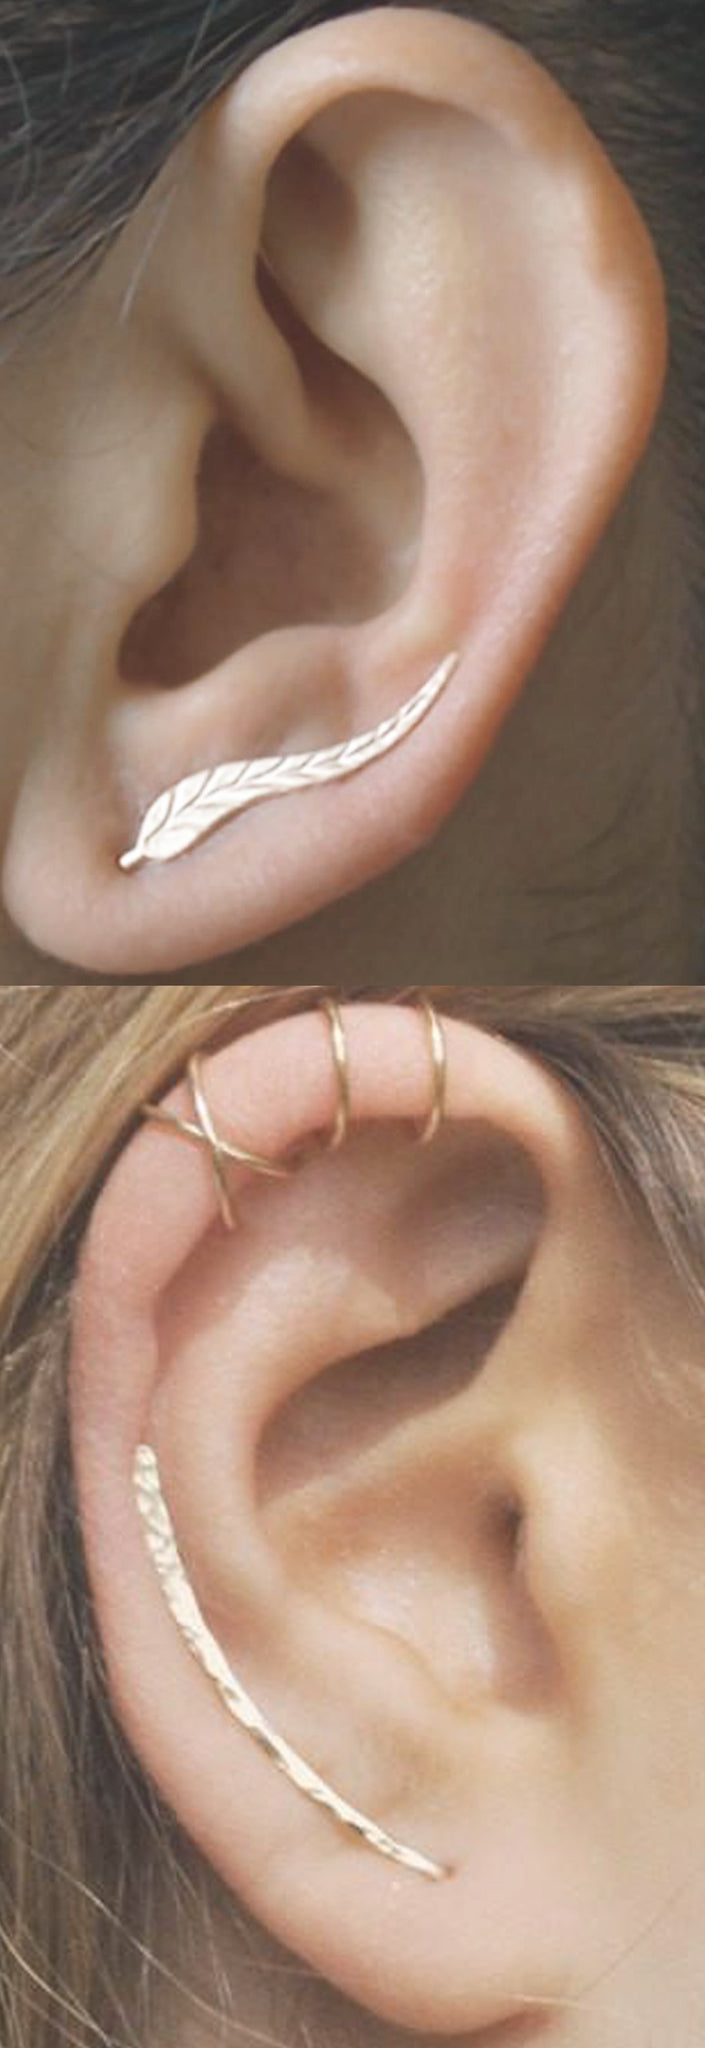 Classy Gold Simple Ear Piercing Ideas at MyBodiArt.com - Hammered Metal Leaf Ear Climber Earring - Cartilage Ring Cuffs  